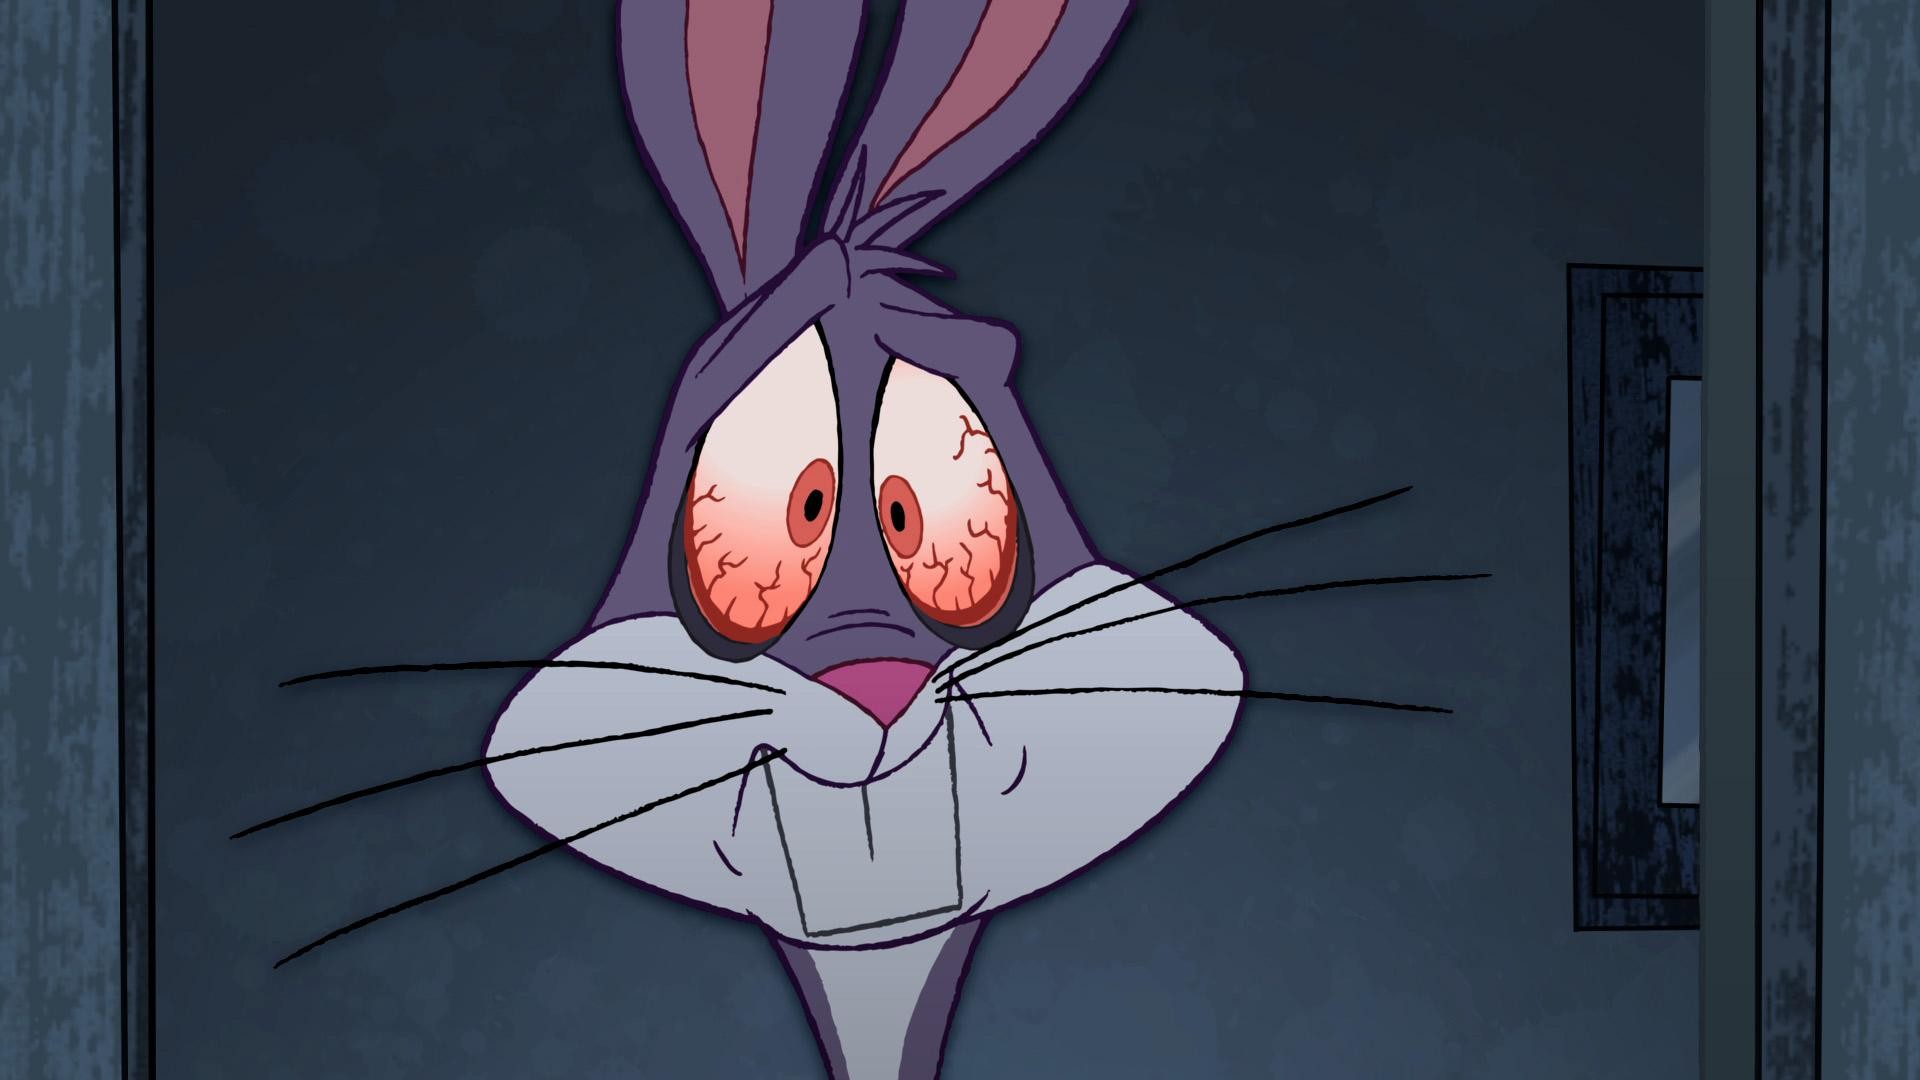 Wallpaper.wiki Bugs Bunny Image PIC WPE0010168